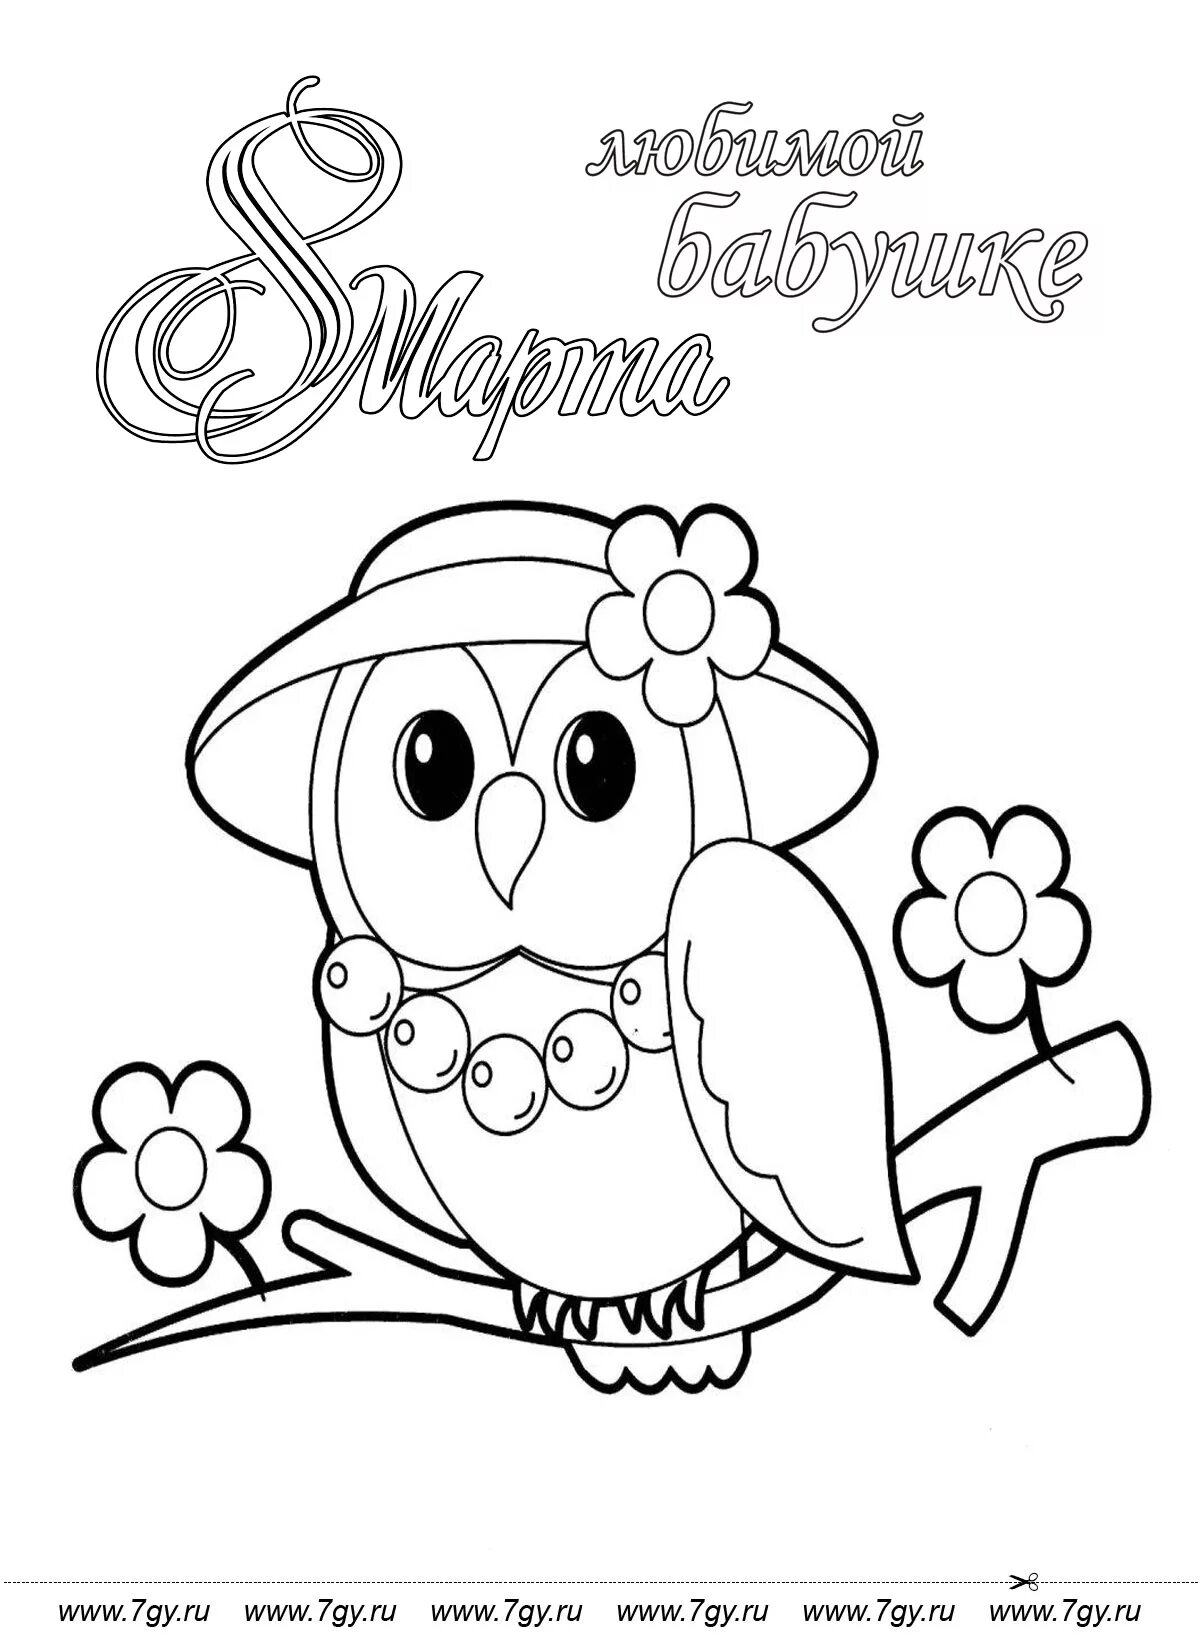 Live coloring March 8 for girls